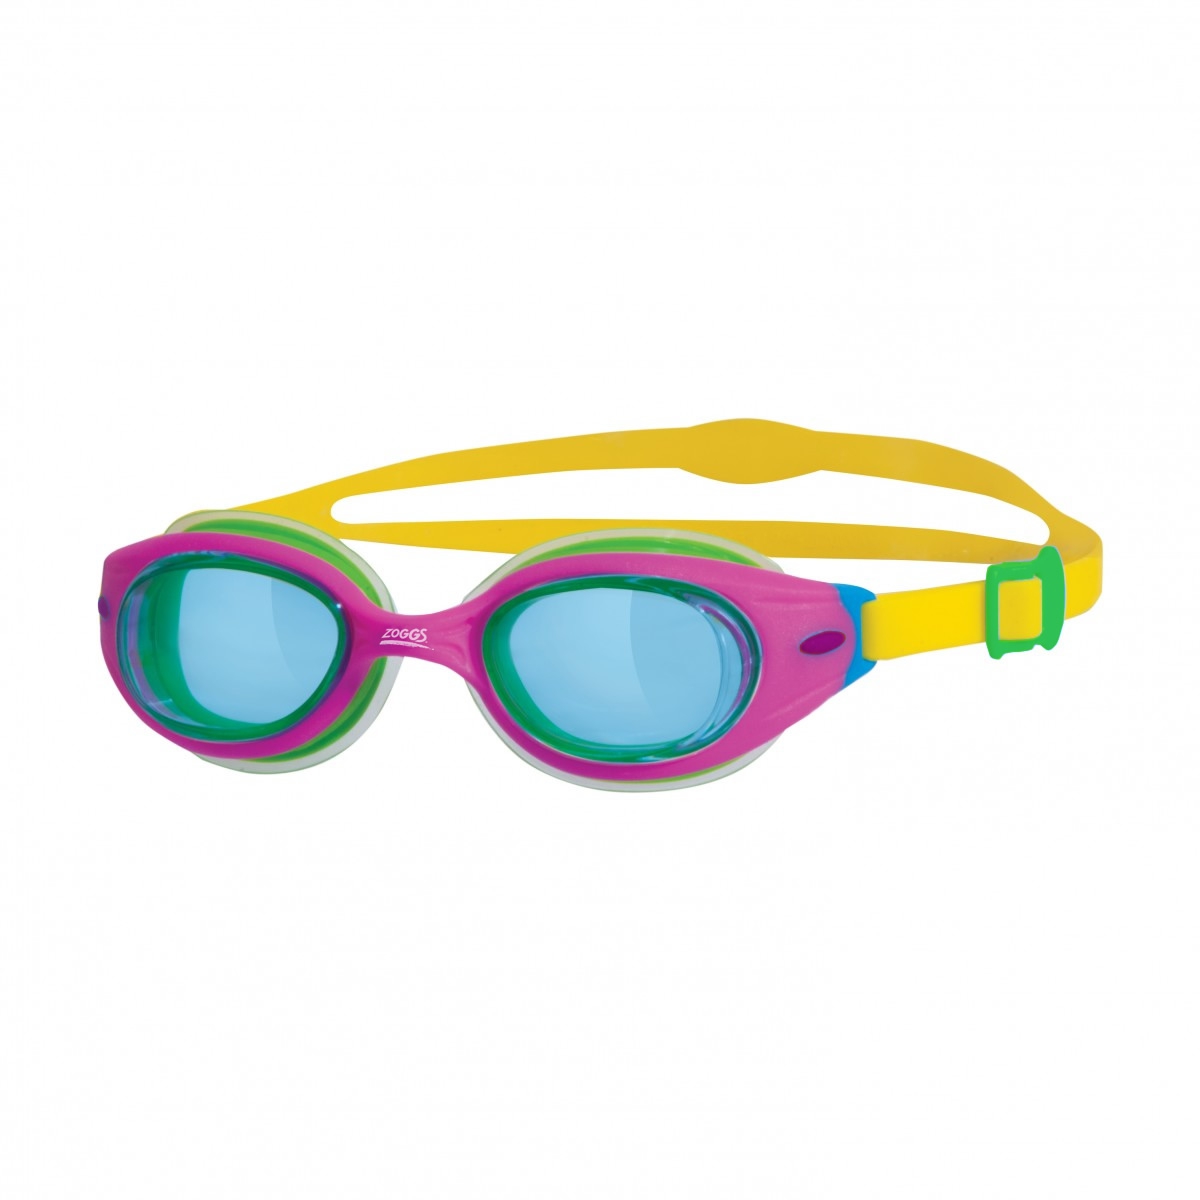 Little Sonic Air 'Purple' Swimming Goggles 0-6 Years Pool